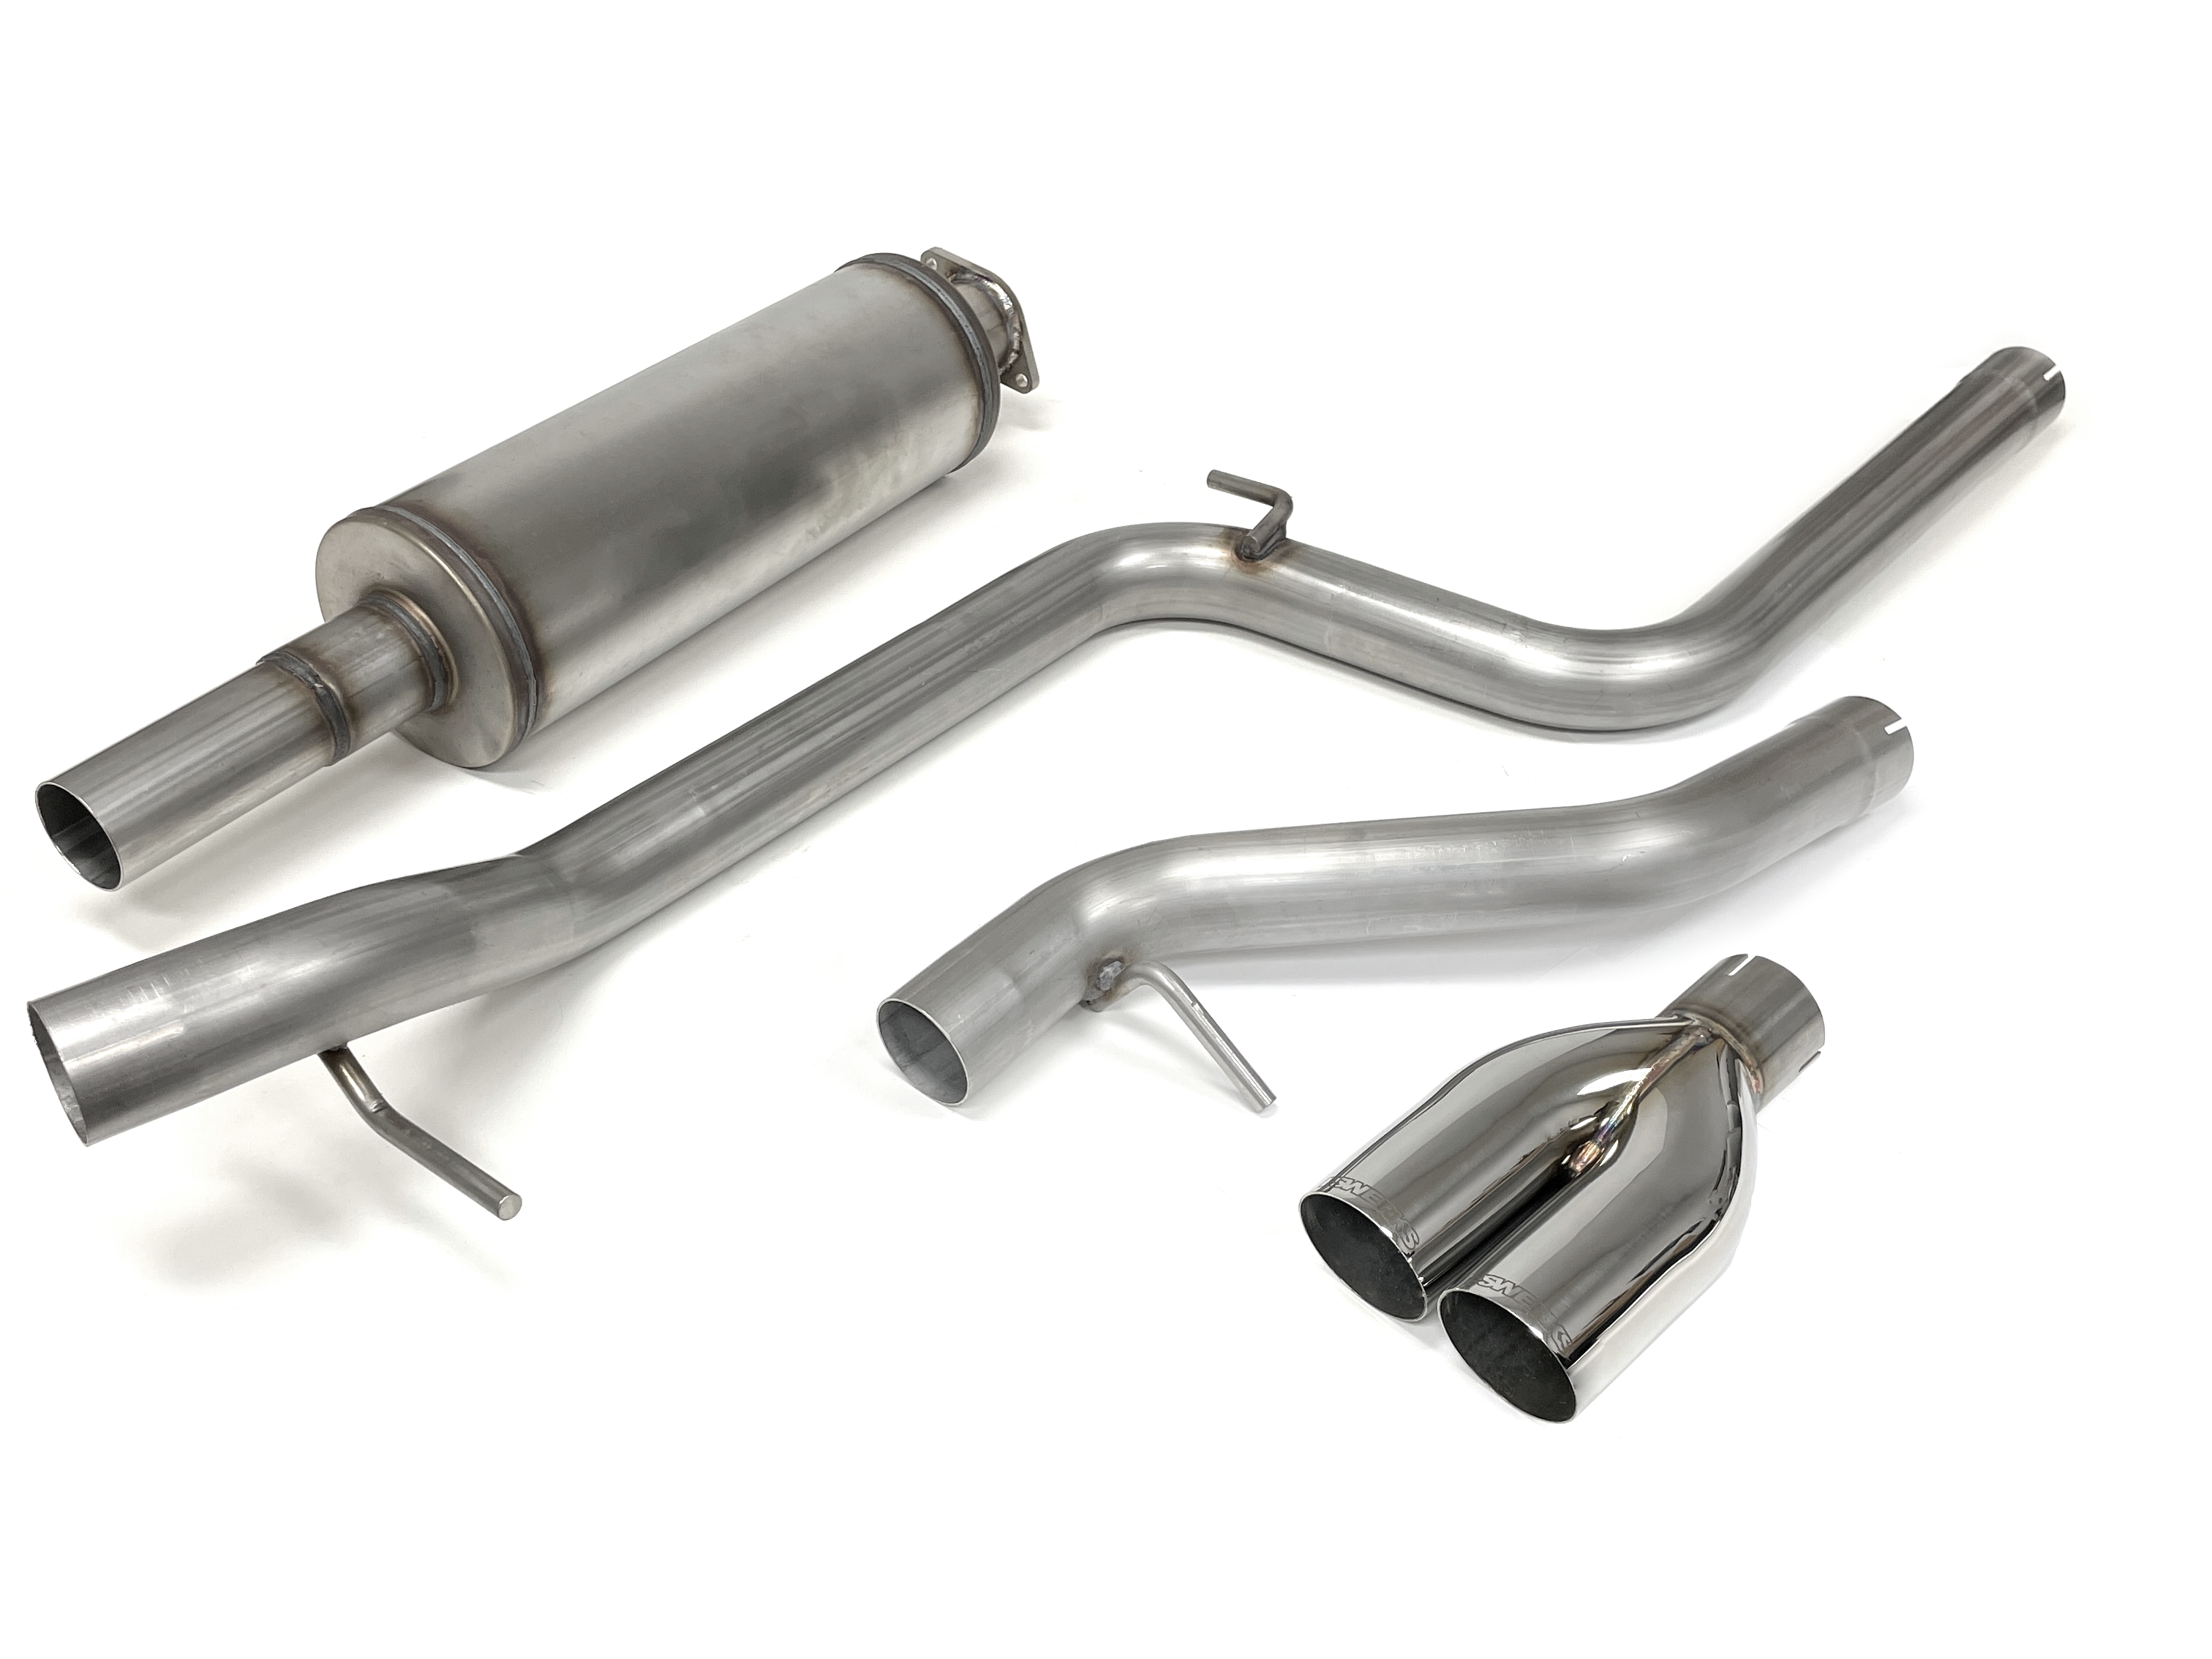 FSWERKS Stainless Steel Catback Race Exhaust System - Ford Focus TiVCT 2.0L 2012-2018 Hatchback